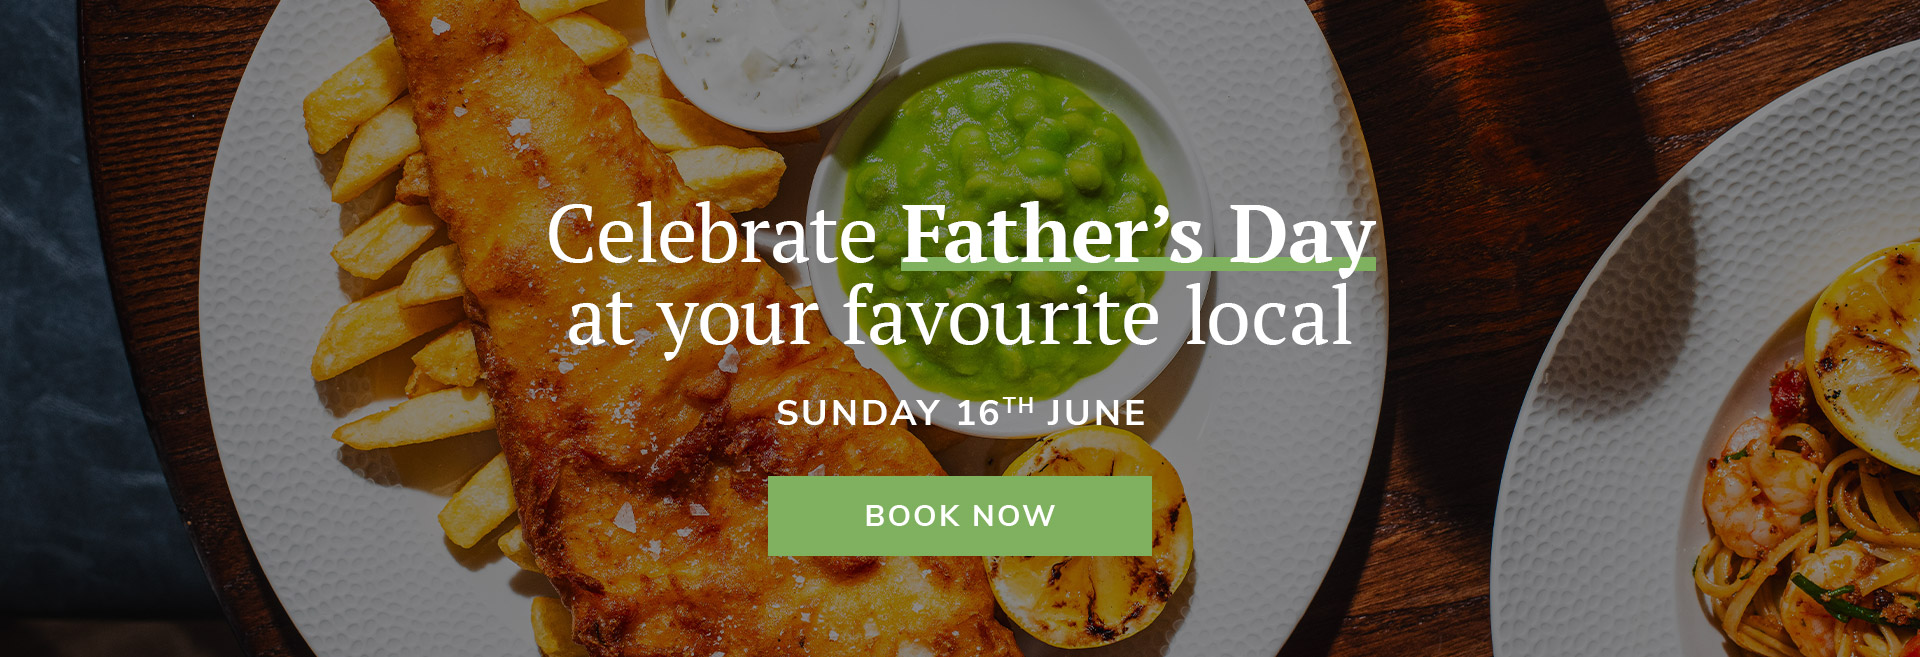 Father's Day at The Mitre